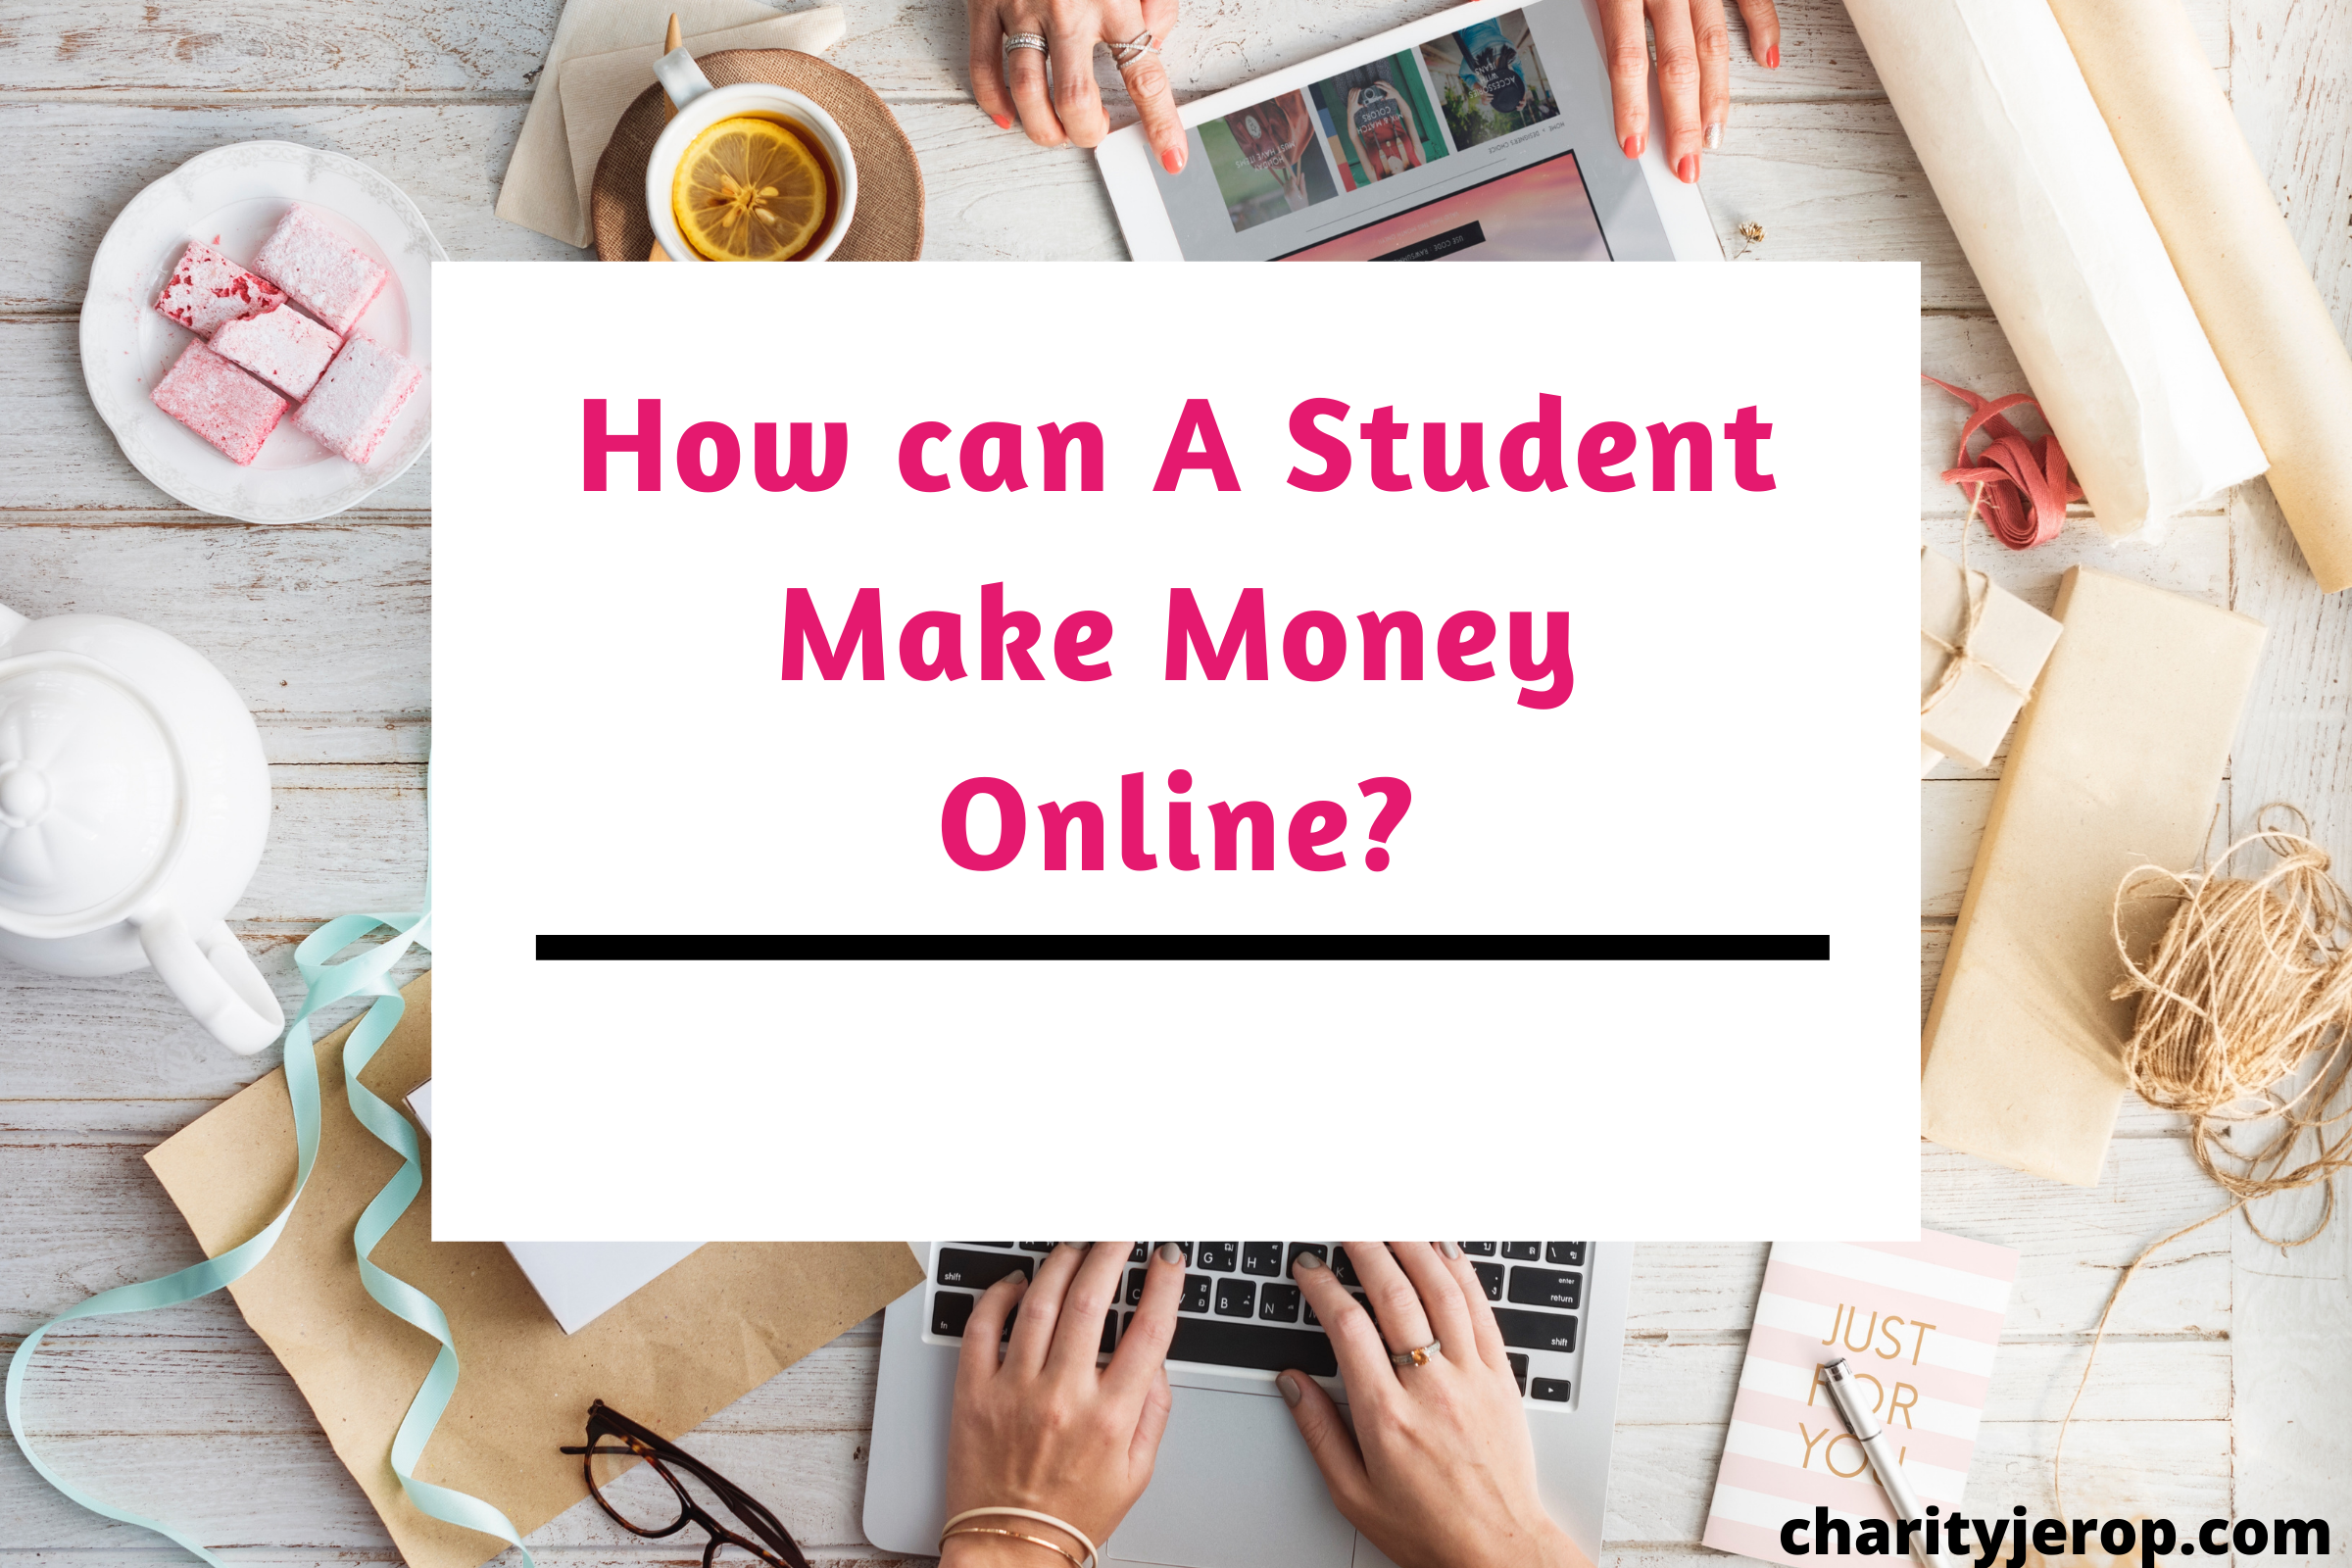 How Can a Student Make Money Online in Kenya?